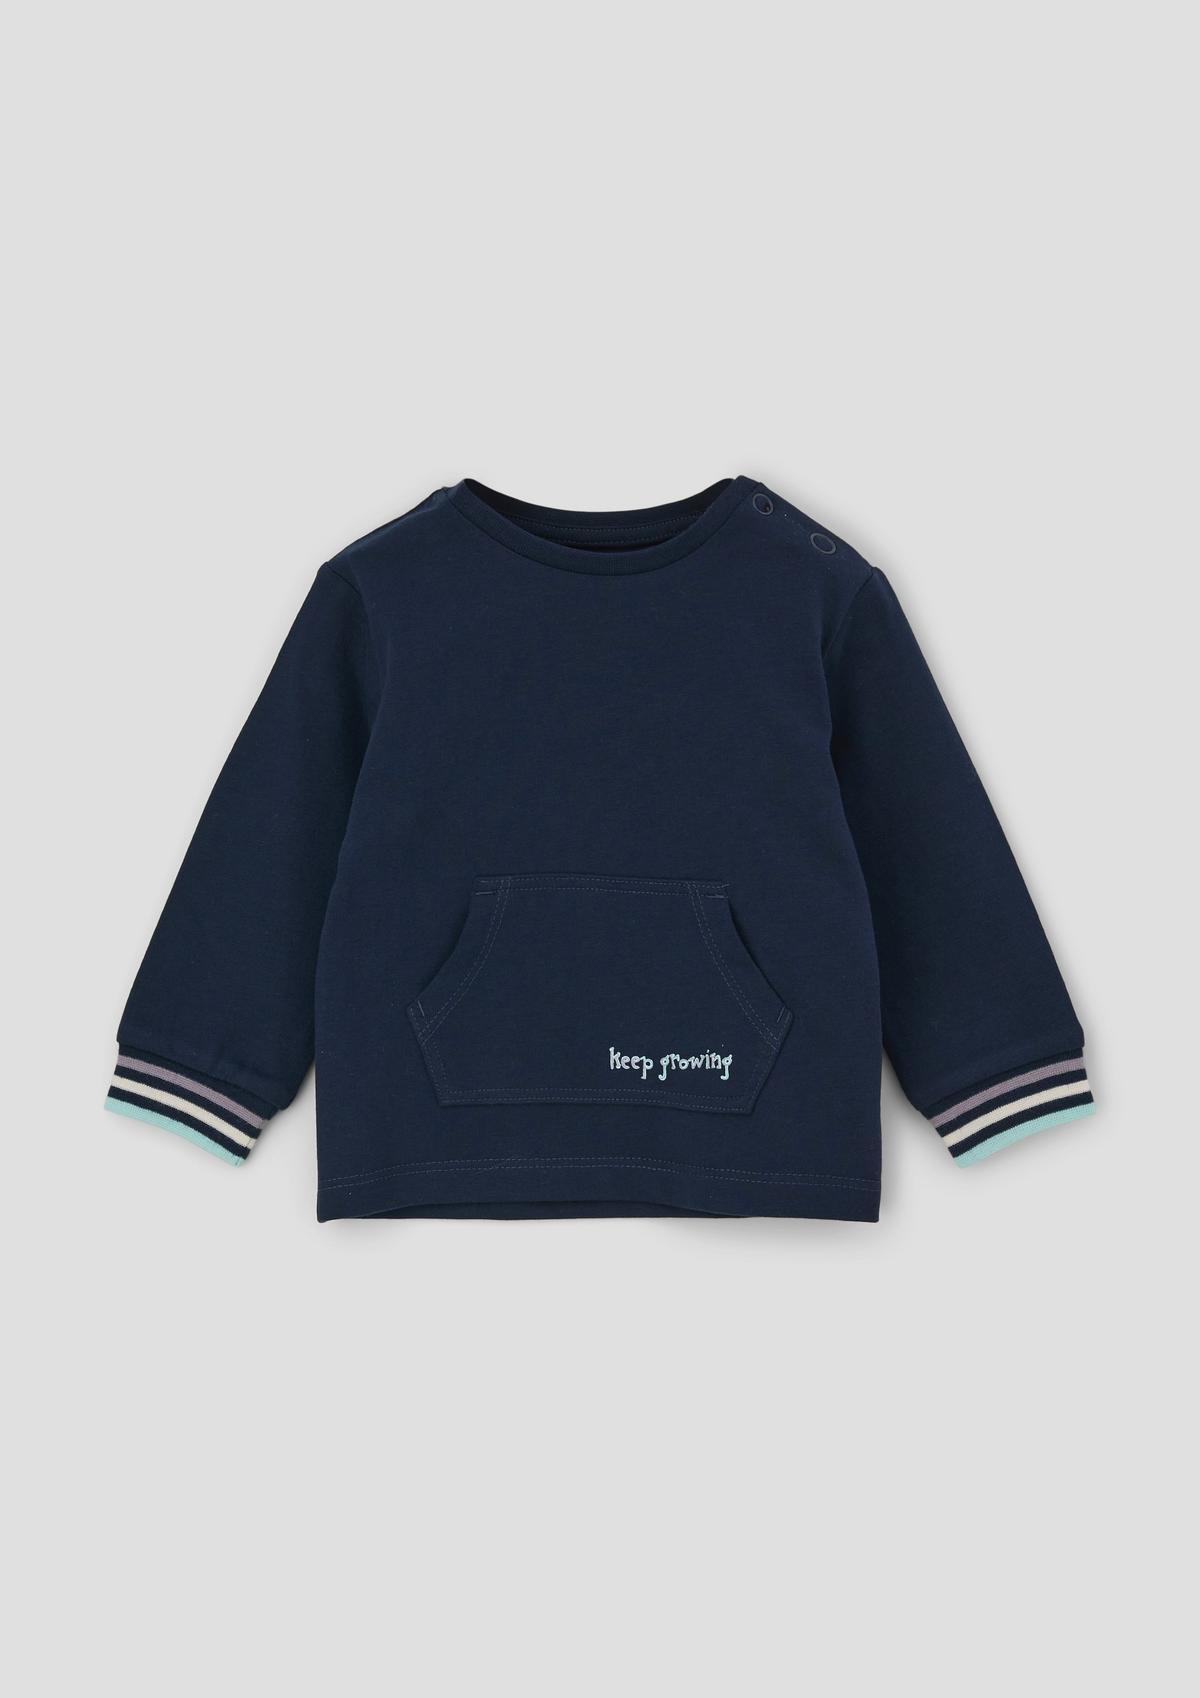 s.Oliver Long sleeve top with a kangaroo pocket